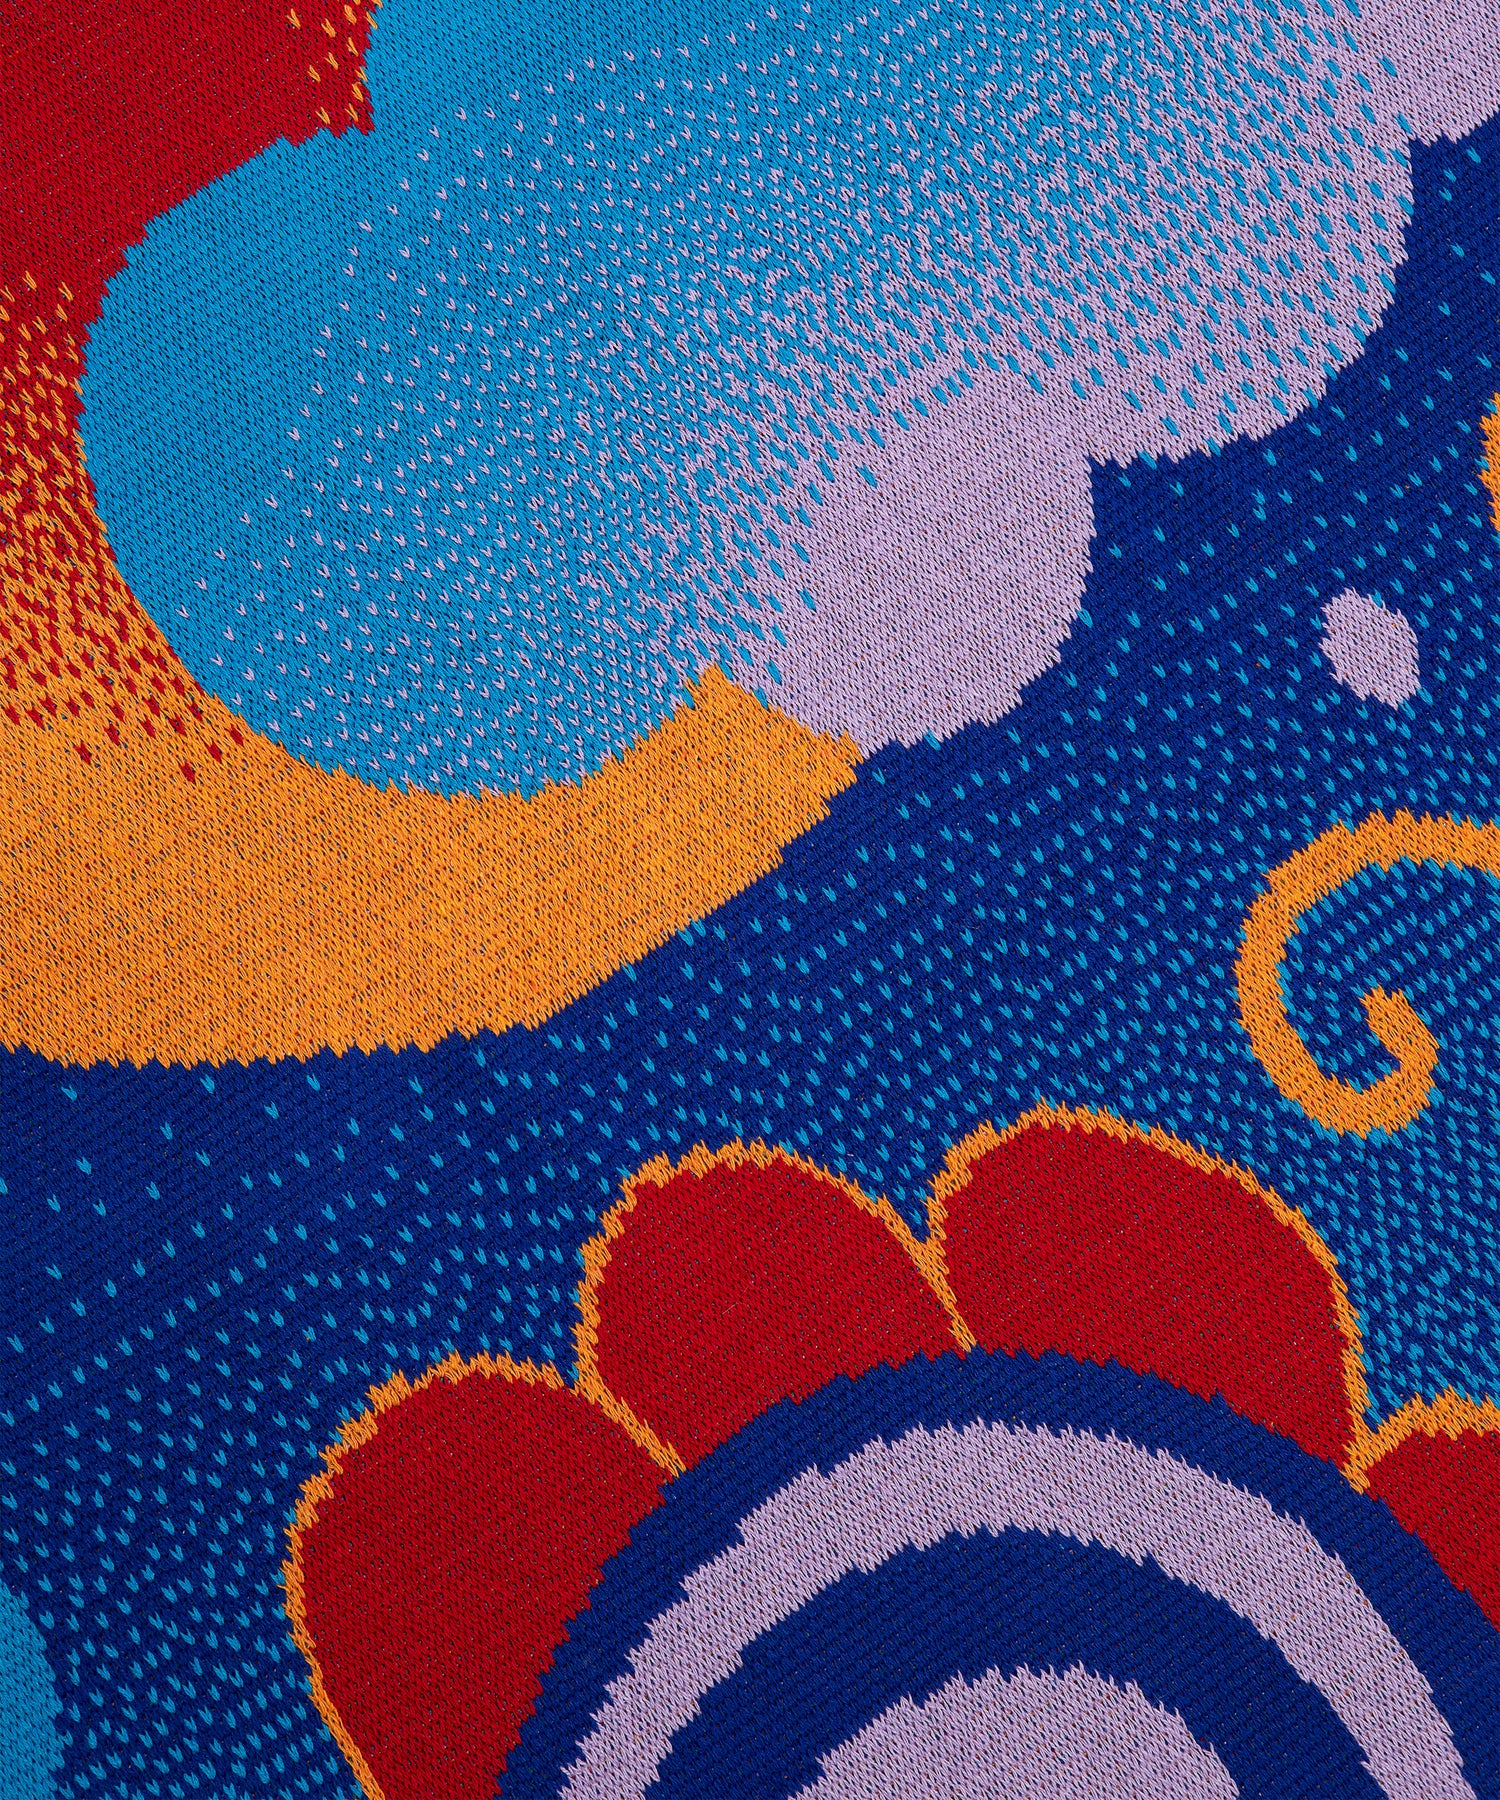 Close up of the Best Buds Blanket showing a flower with red petals outlined in yellow with a spiral light purple and dark blue flower center. Above the cut off flower is a blue cloud that is sitting on top of the red and yellow sun.